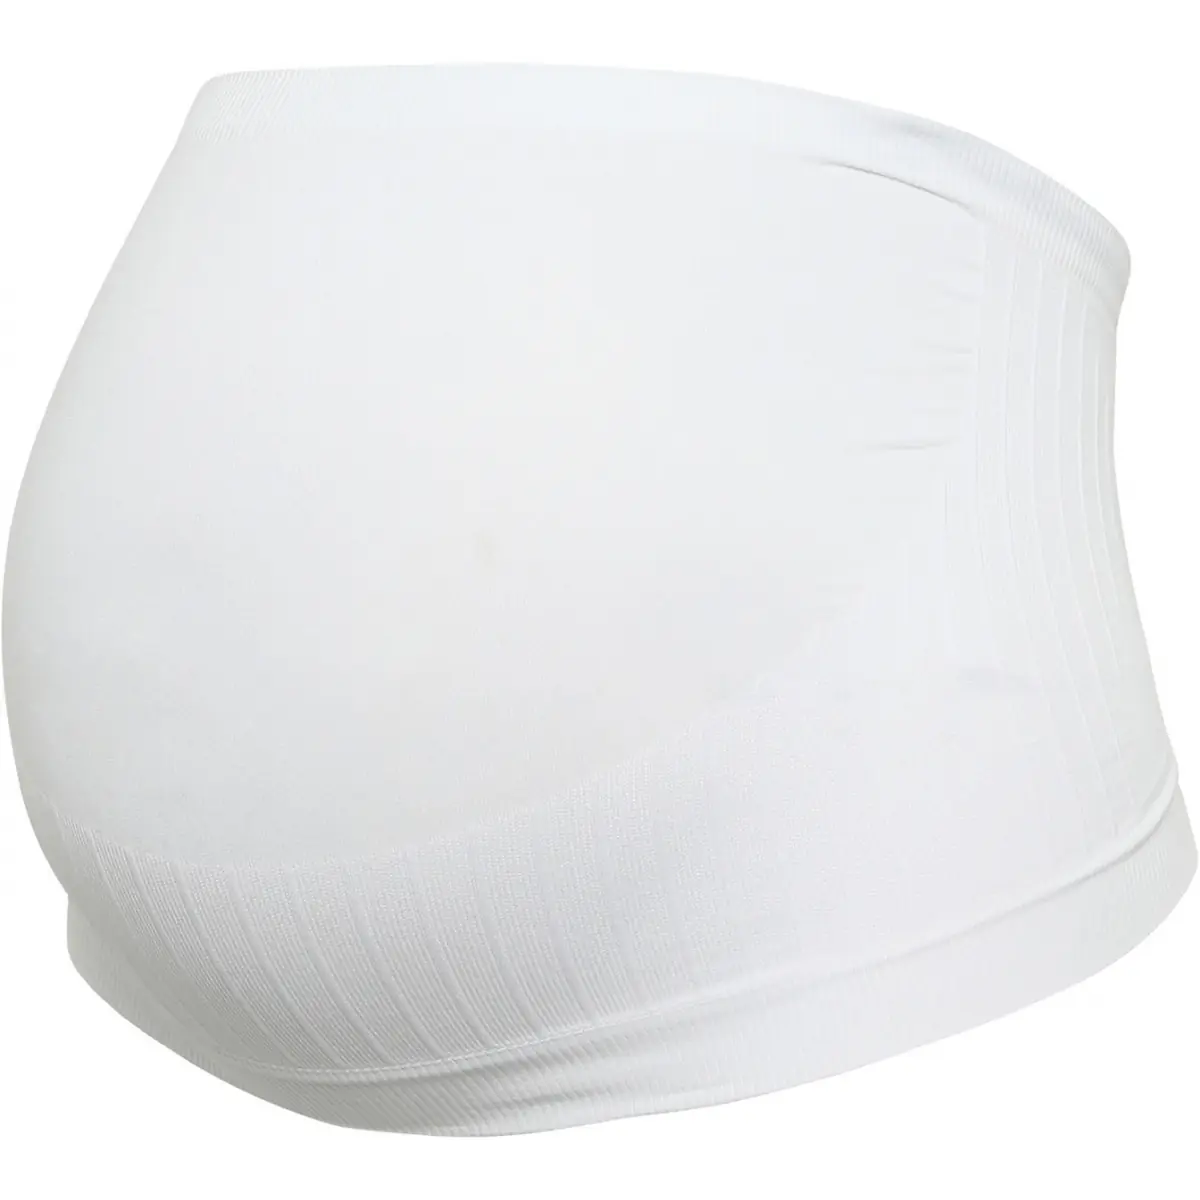 Image of Carriwell Maternity Support Band - White (Size - LARGE)